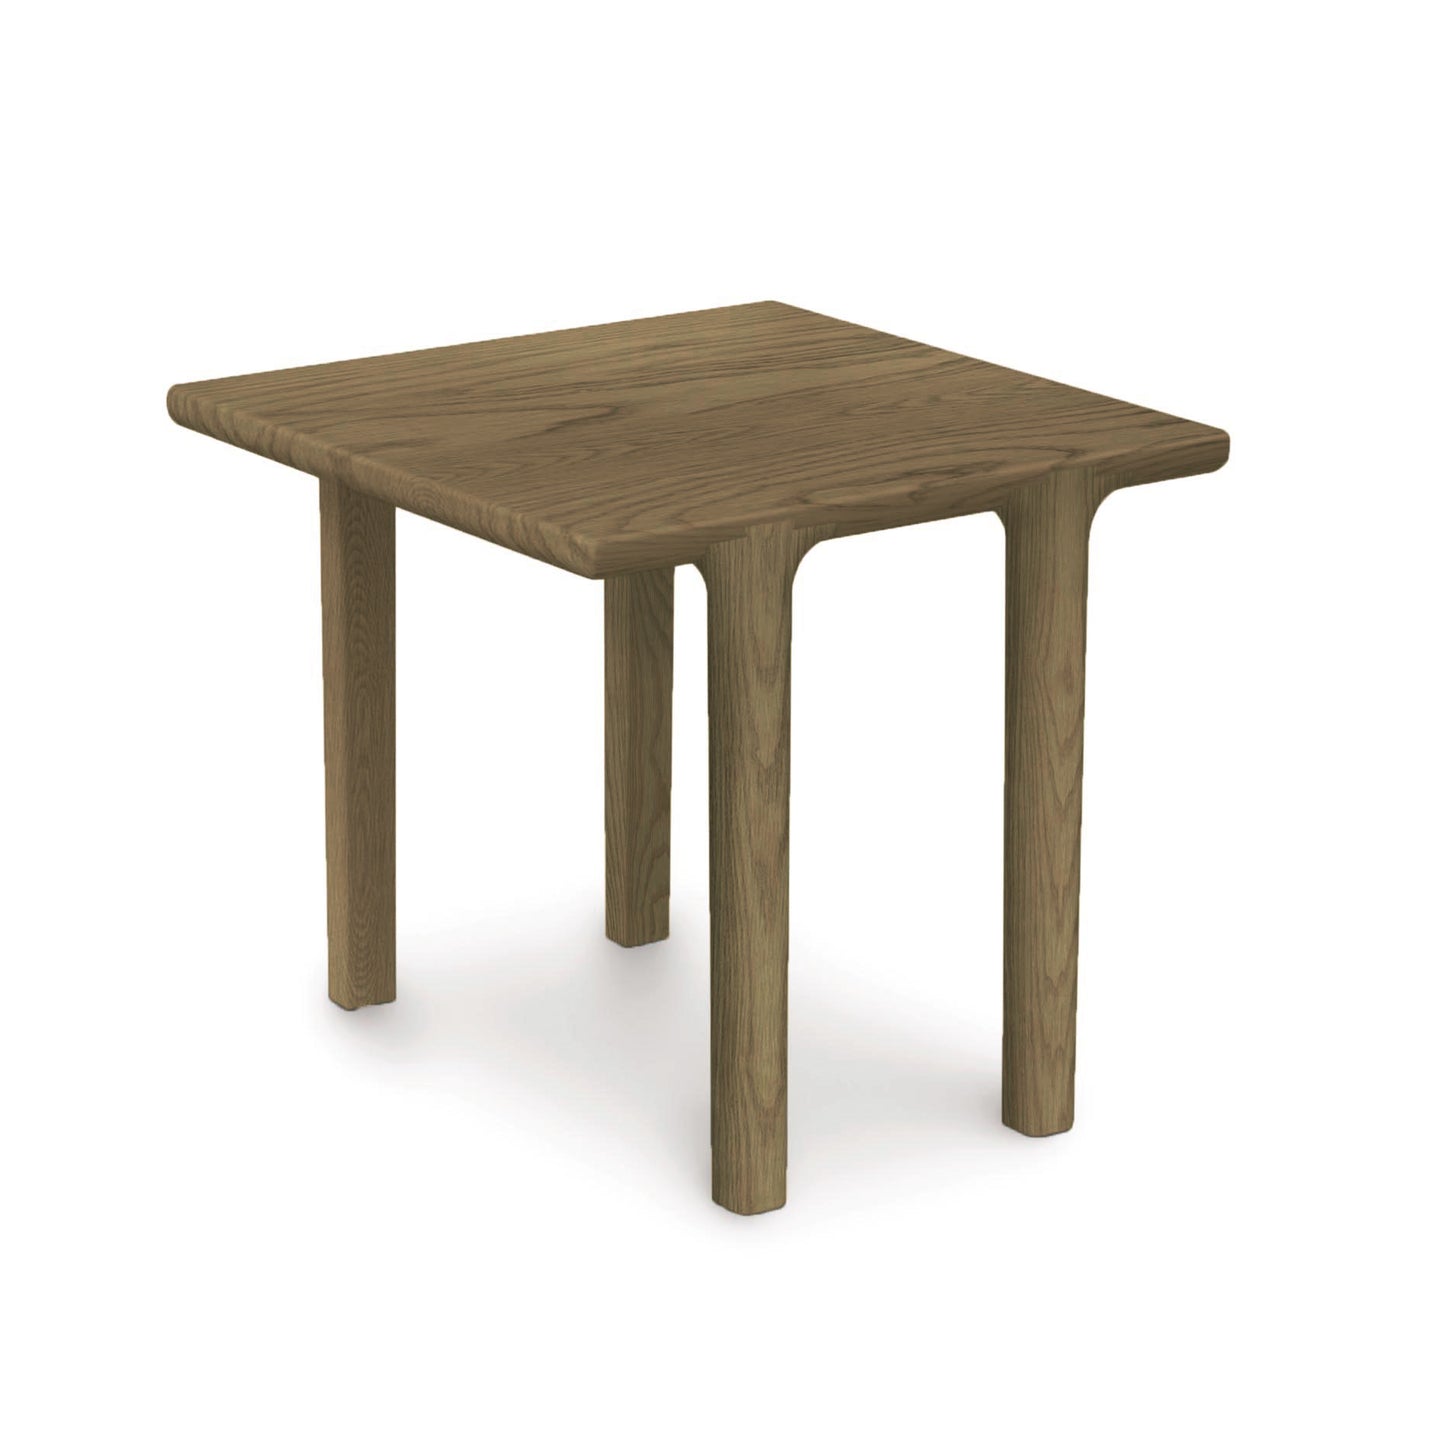 A Copeland Furniture Sierra Square End Table with two legs on a white background.